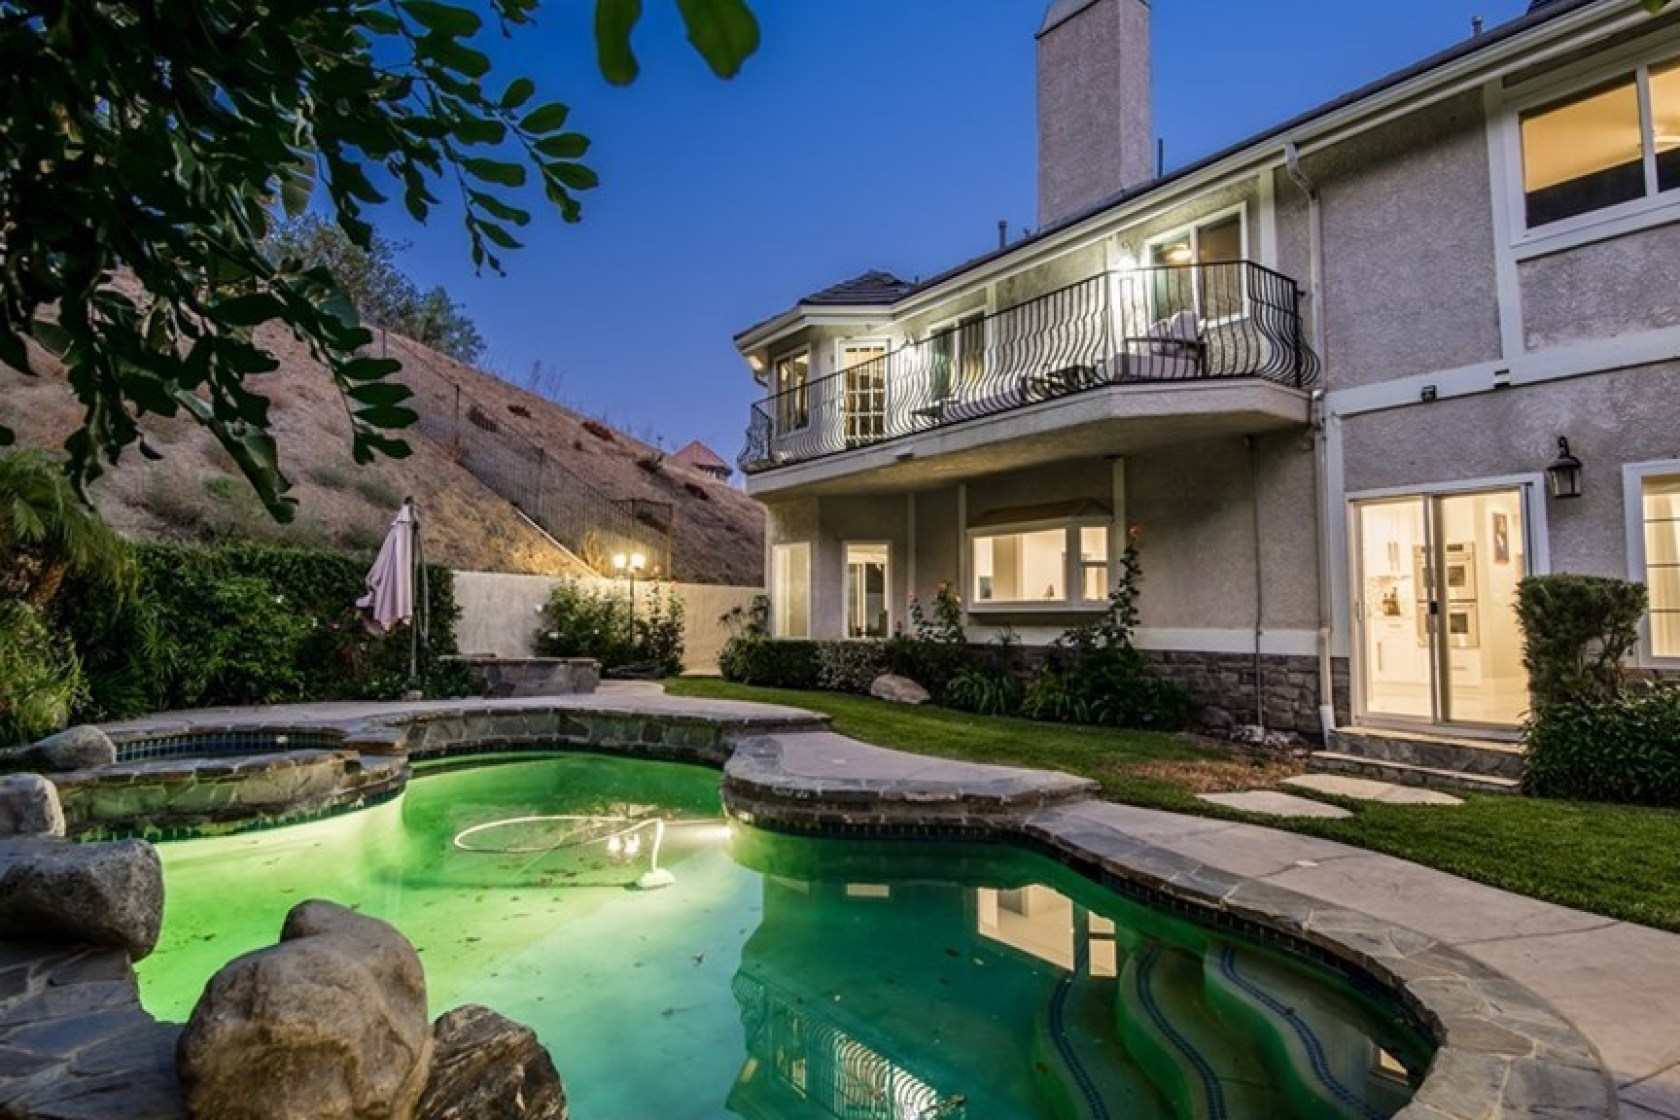 Shaquille O’Neal Puts His $2.5 Million L.A. Home Up For Sale 1058144980